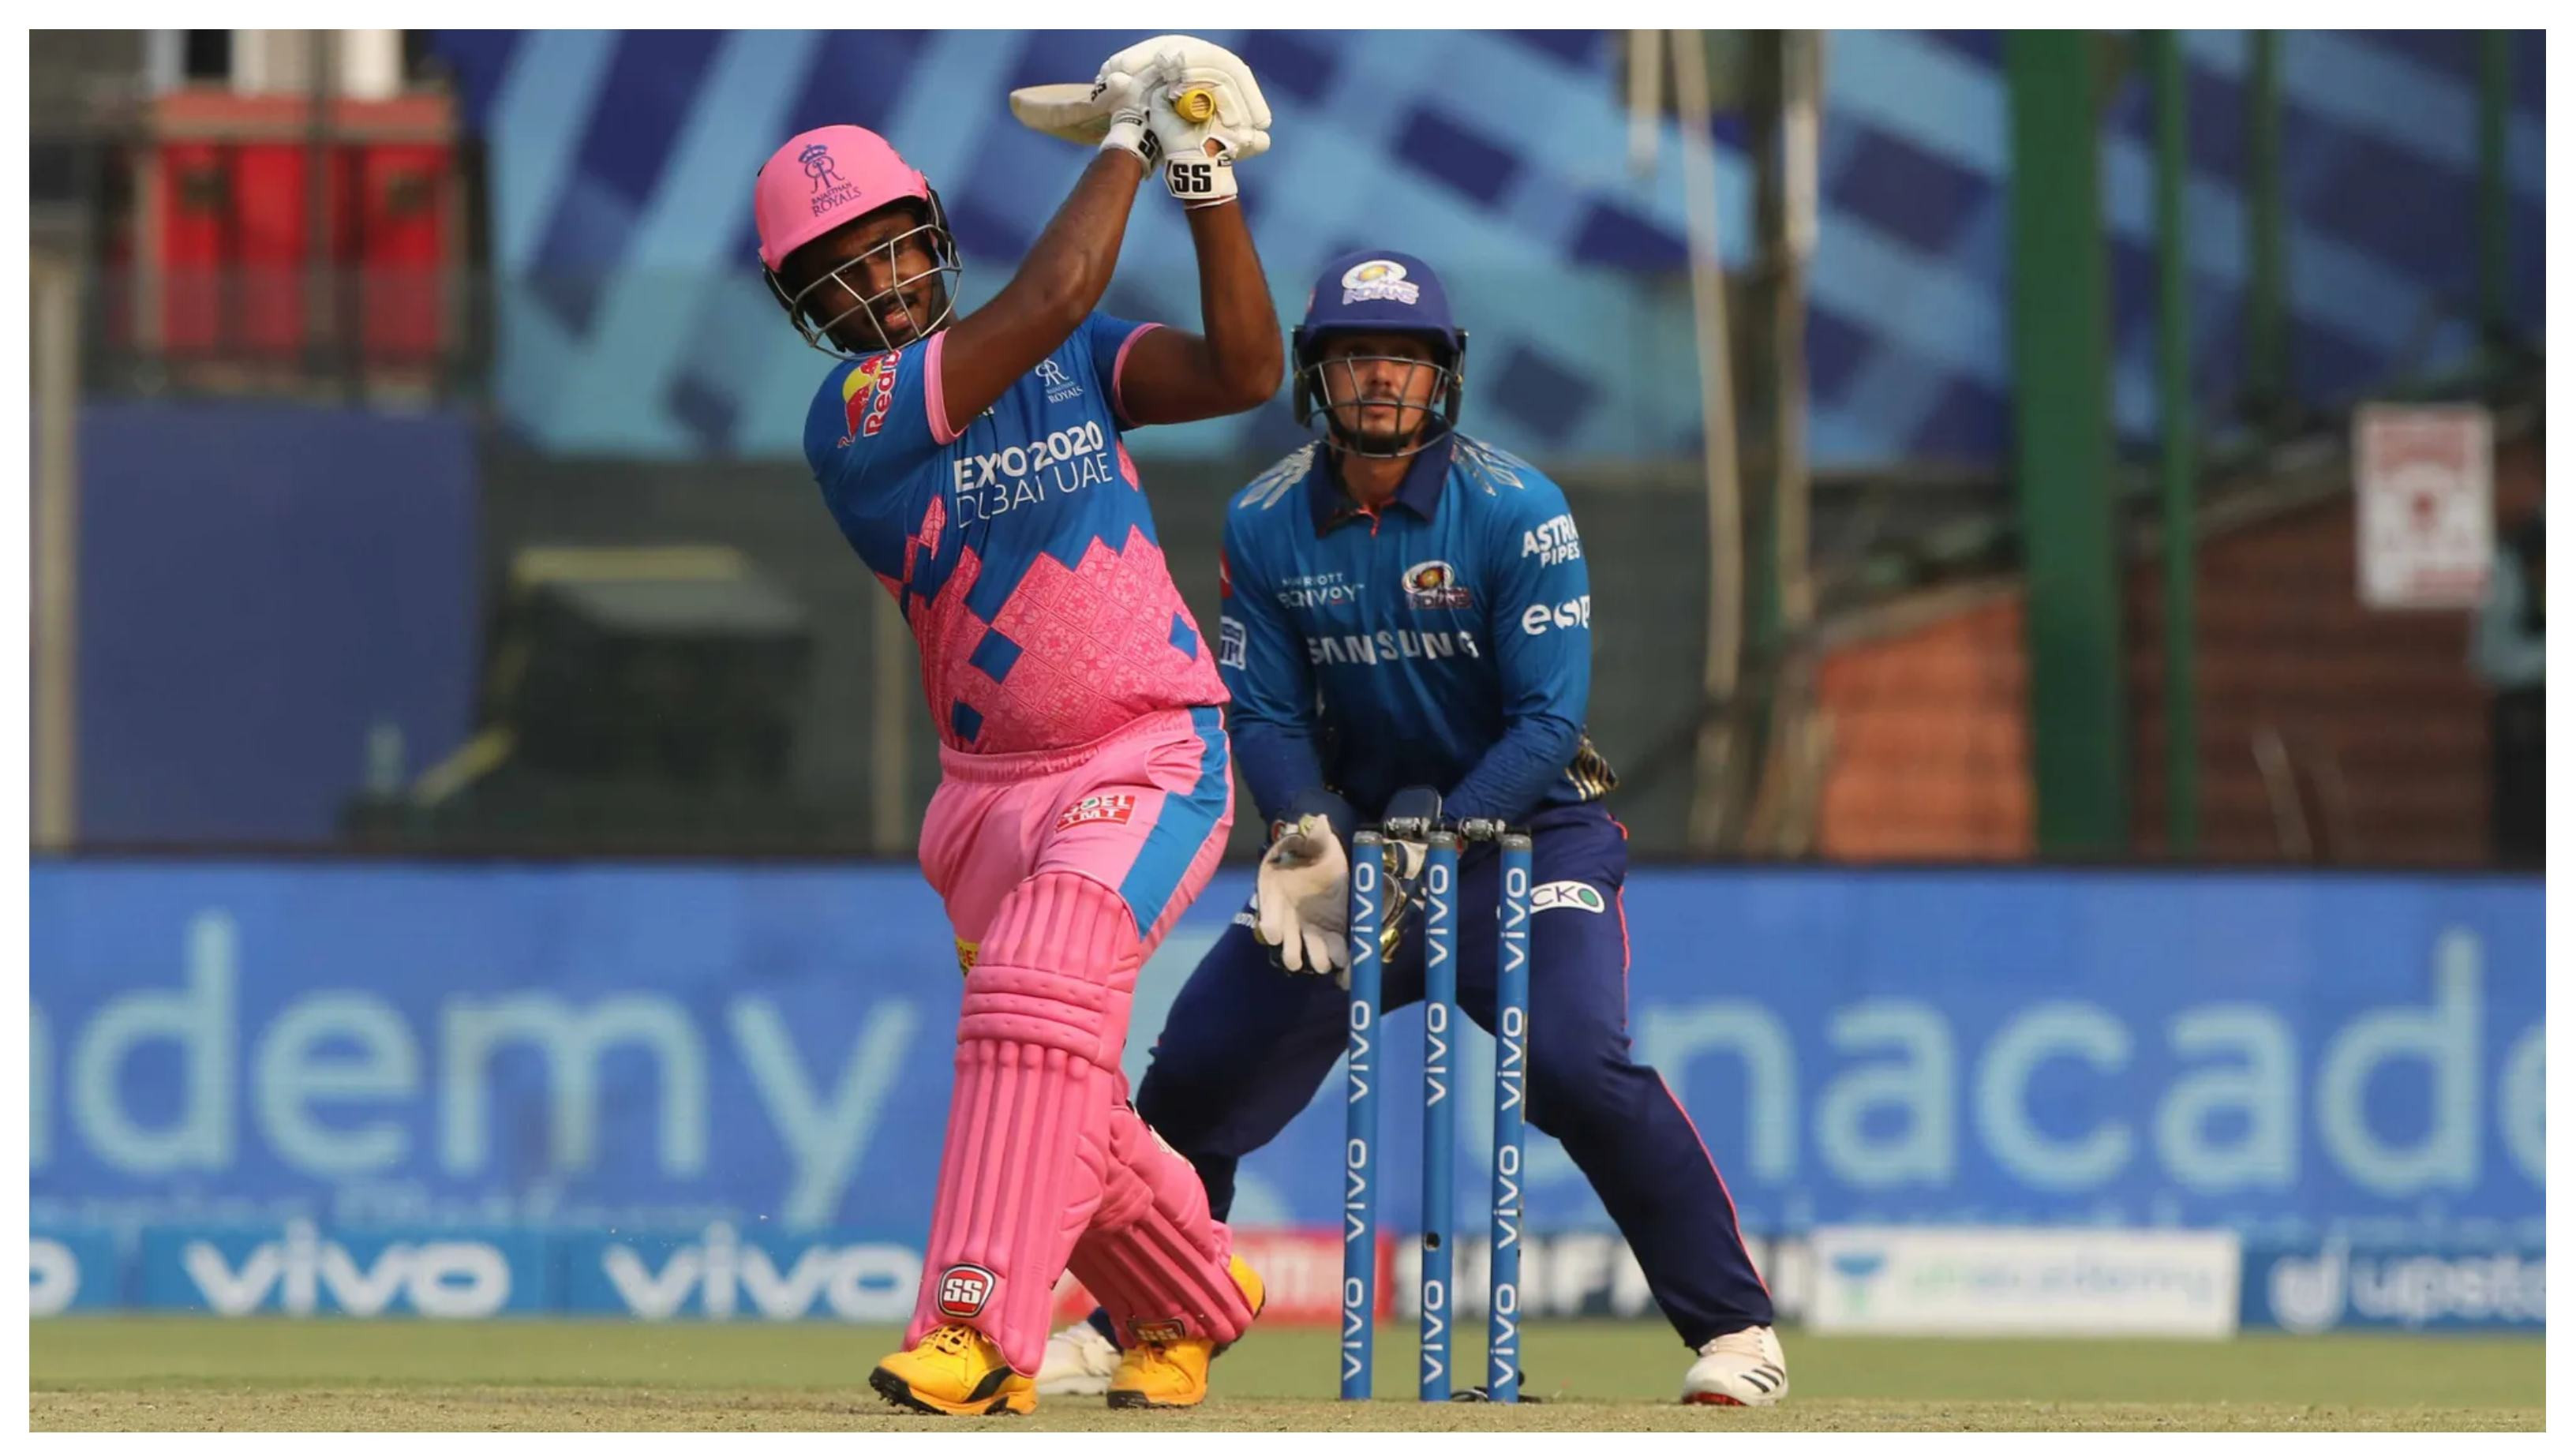 IPL 2021: RR keen to play good cricket to bring up the spirit of entire country, says Sanju Samson